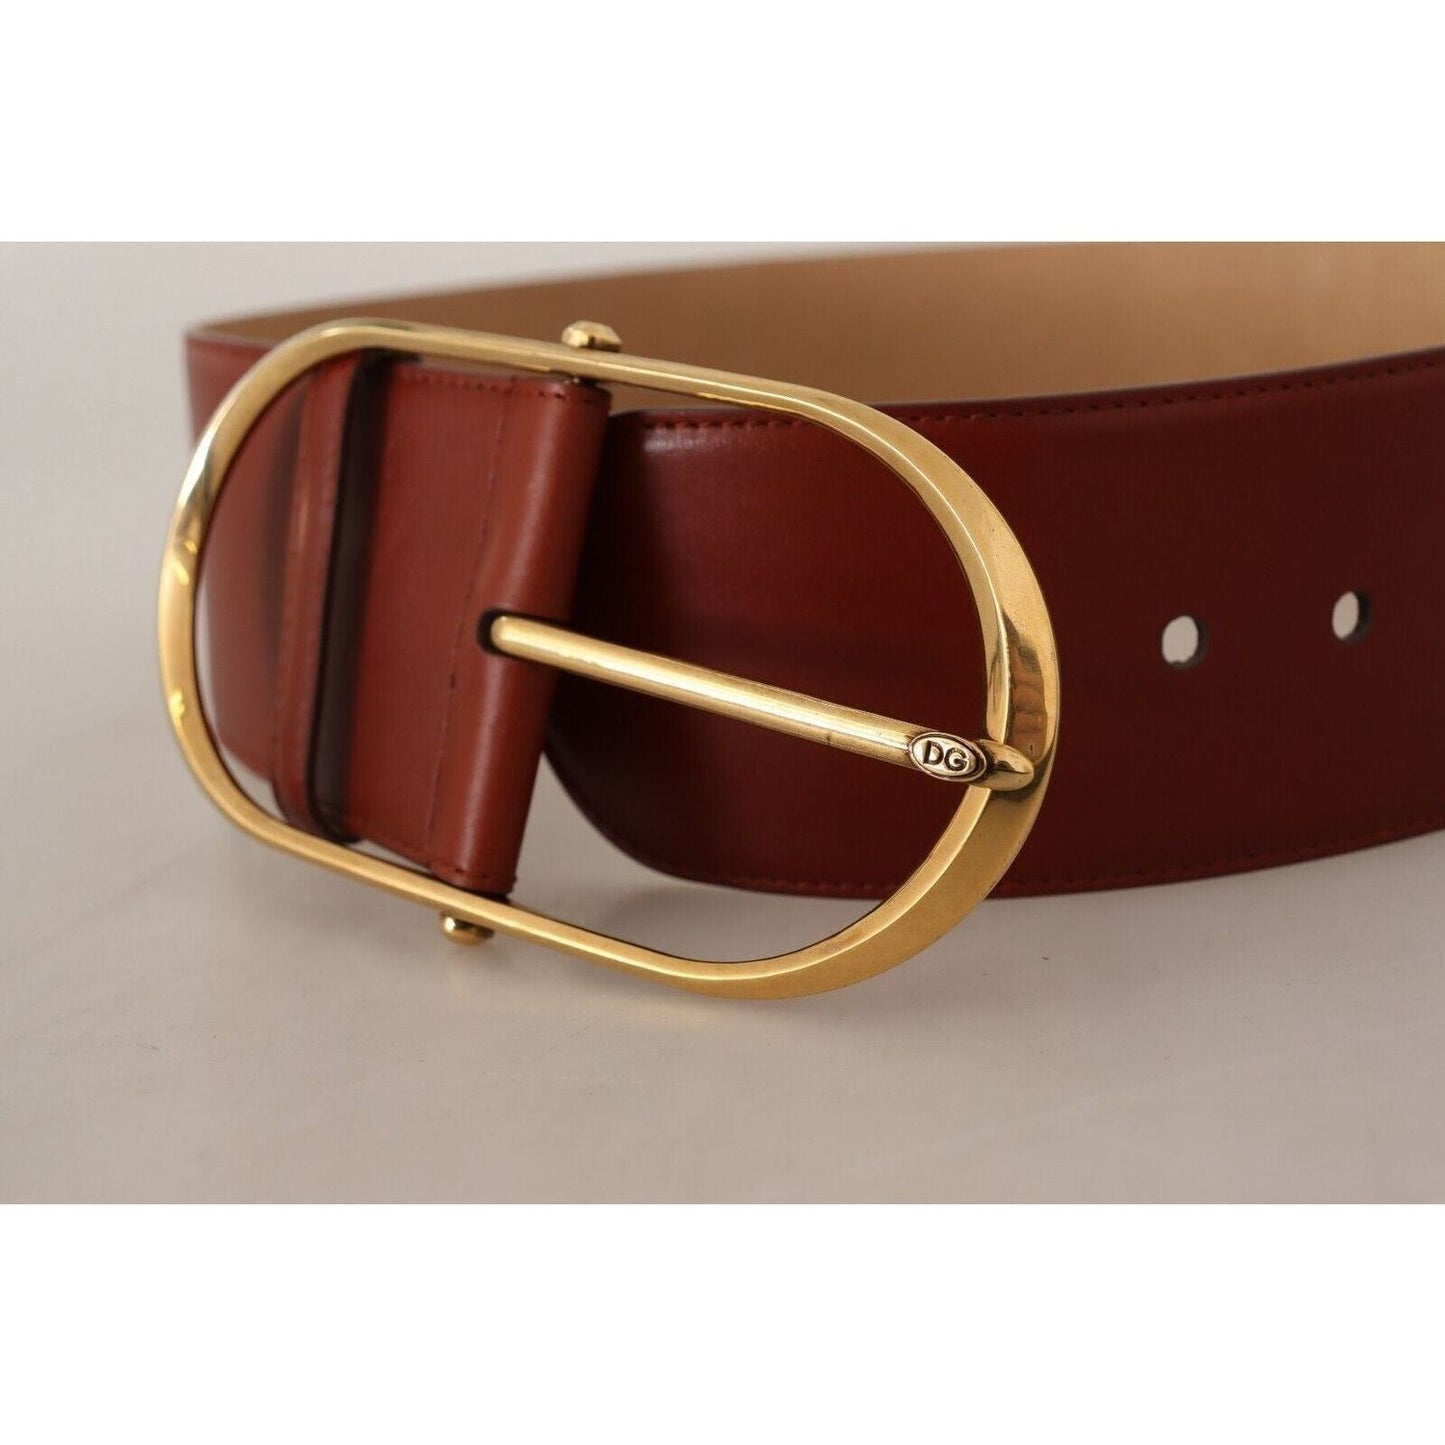 Dolce & Gabbana Elegant Maroon Leather Belt with Gold Accents WOMAN BELTS maroon-leather-gold-metal-oval-buckle-belt-1